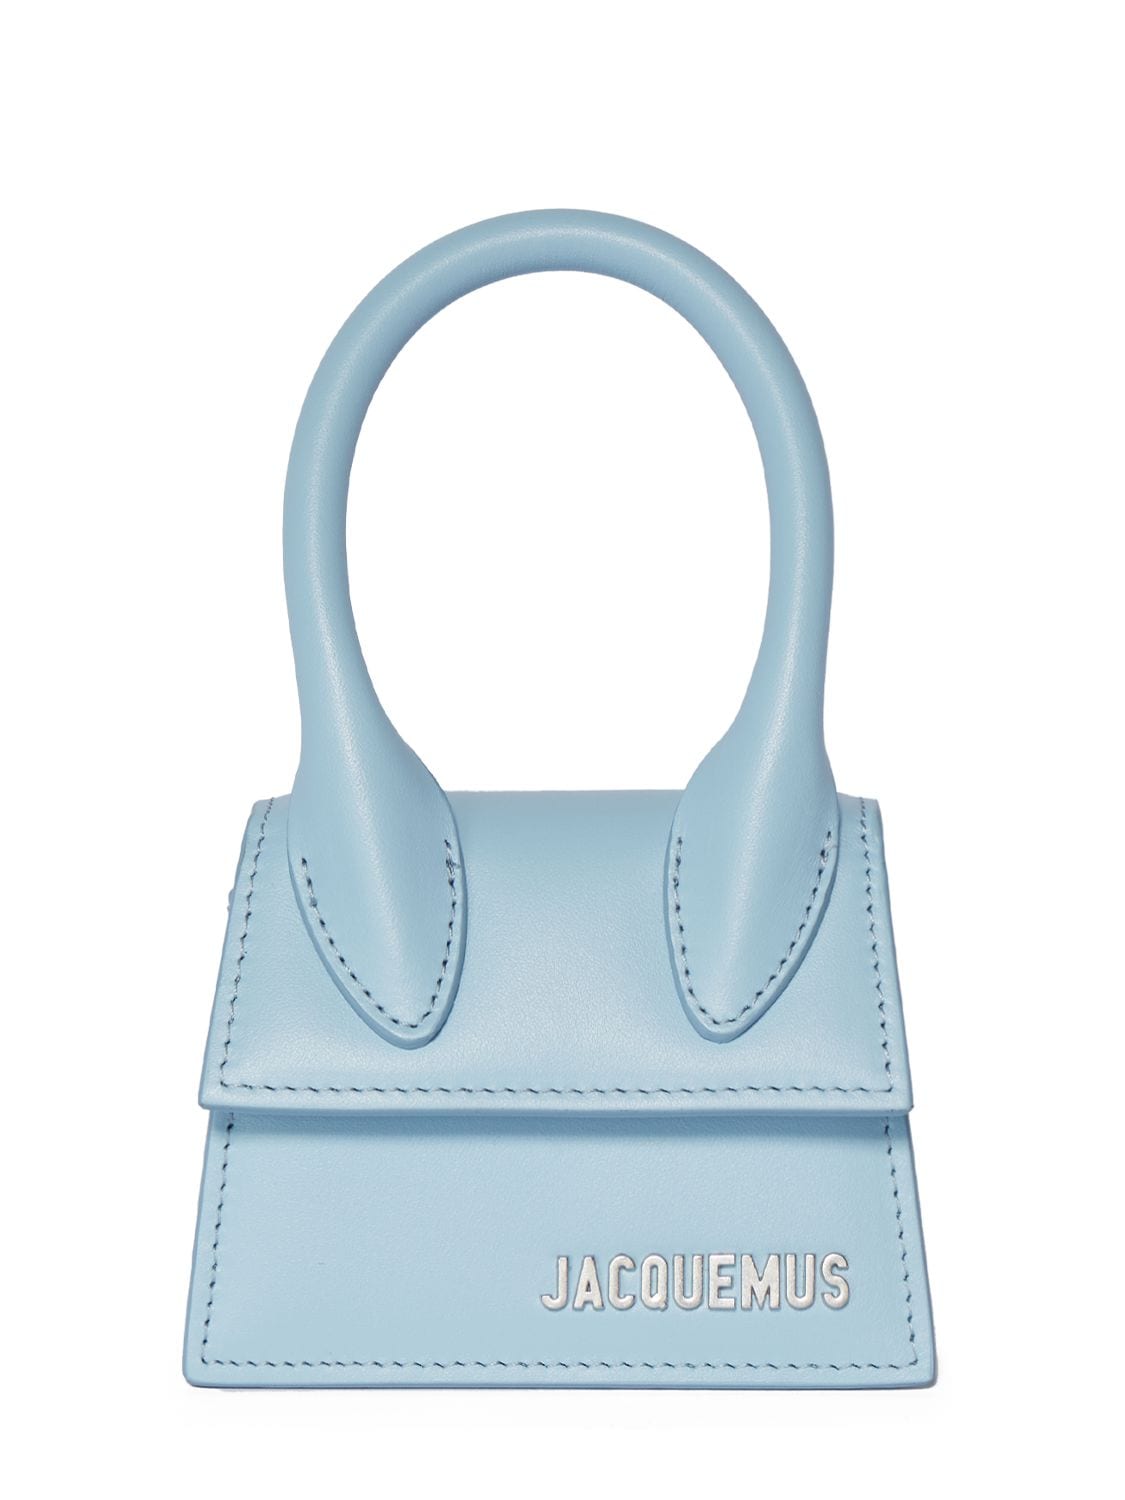 Jacquemus Le Chiquito Homme Top Handle Bag In Light Blue